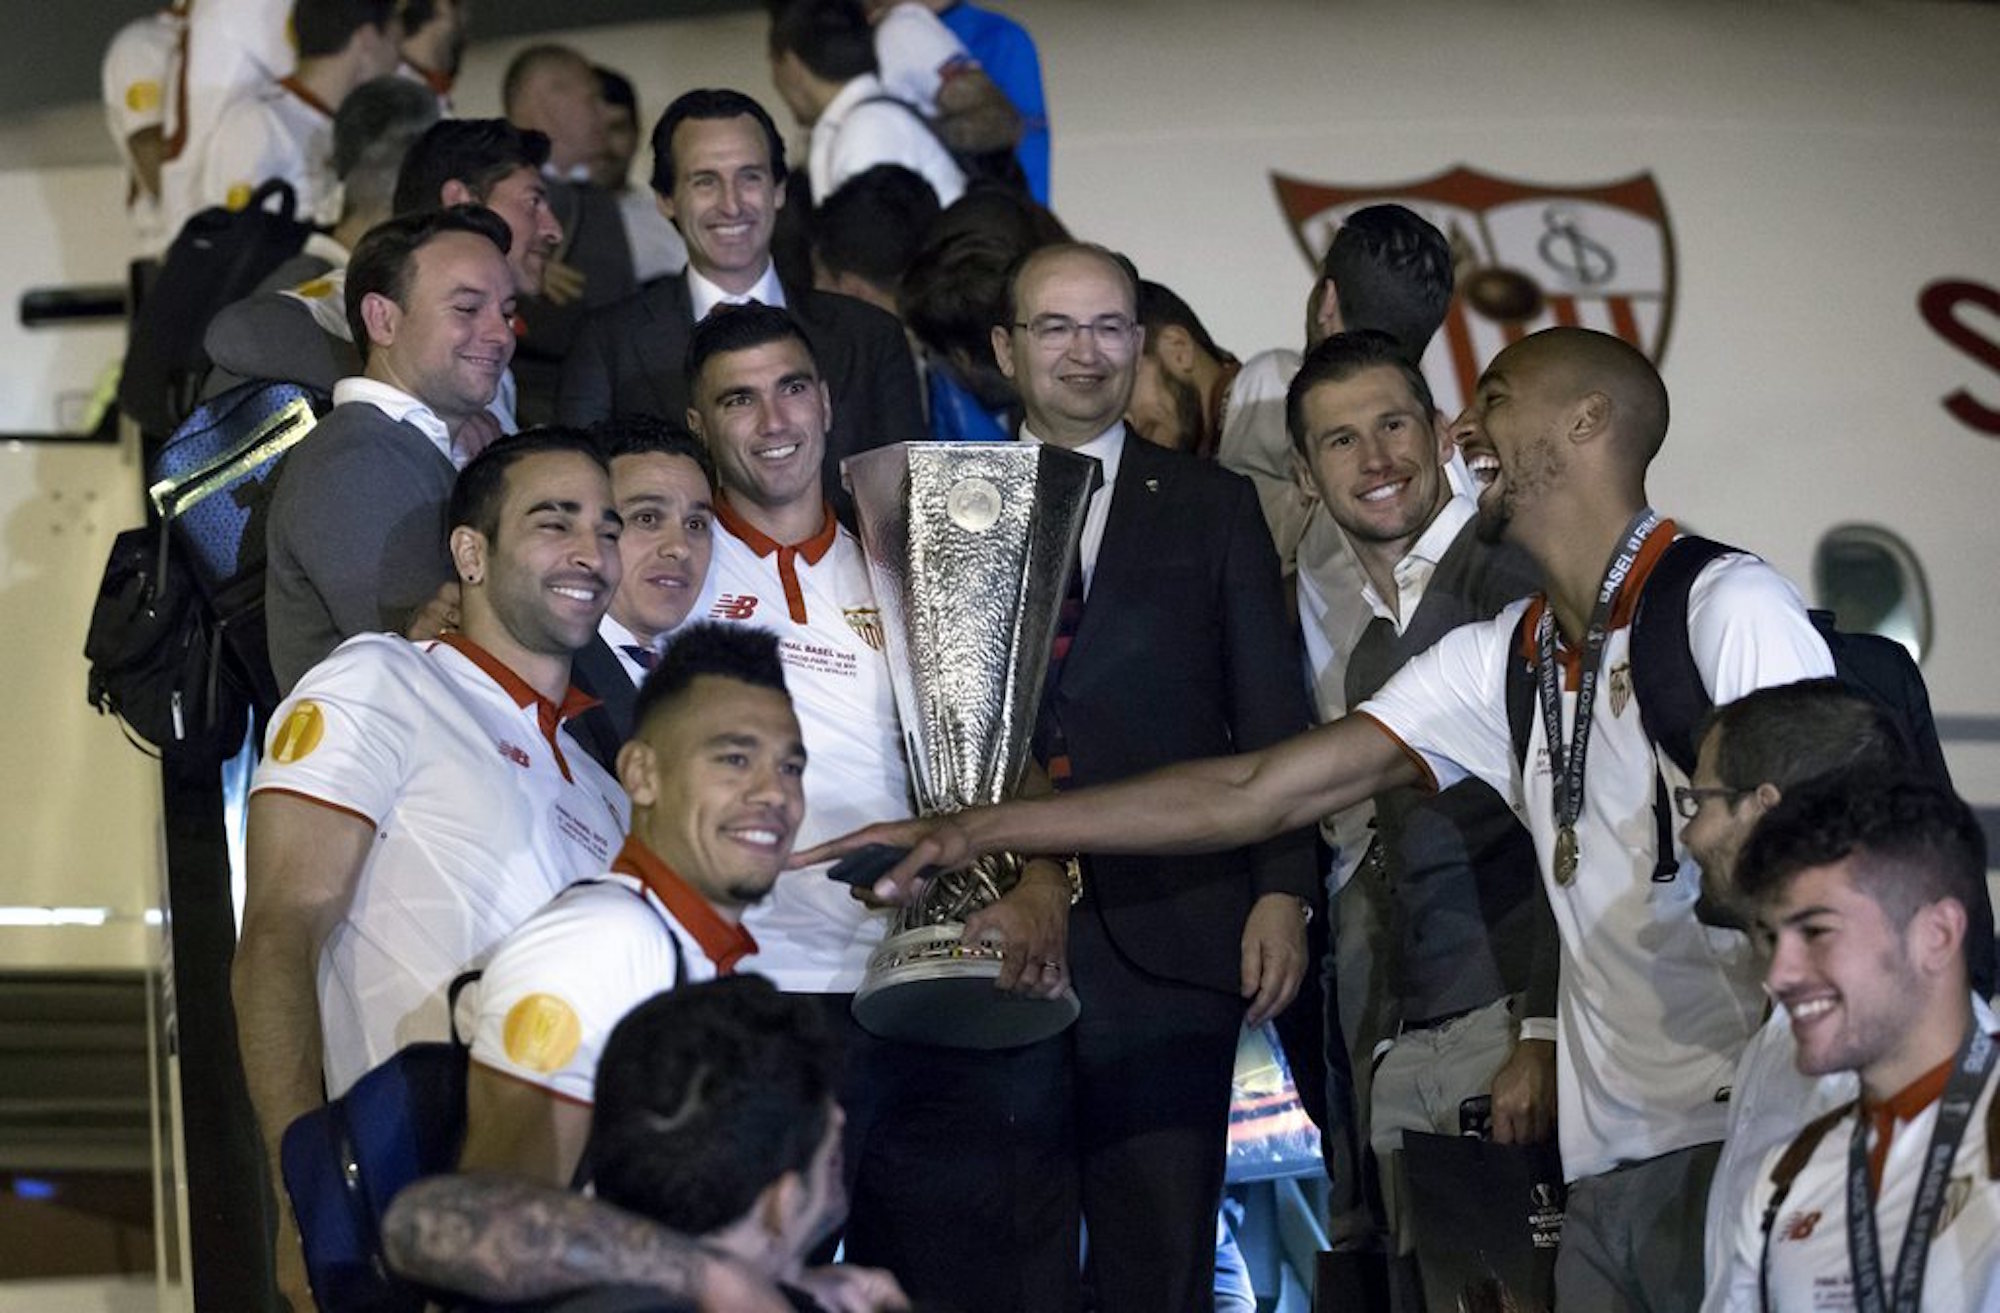 epa05315950 Sevilla FC's captain Jose Antonio Reyes (C-L) poses with the UEFA Europe League's champions trophy next to the president of the team, Jose Castro (C-R), and head coach, Unai Emery (C, rear), upon the arrival of the team to airport of Seville, southern Spain, early 19 May 2016. Sevilla FC defeated Liverpool by 1-3 in the UEFA Europe League final played at the St. Jakob-Park stadium in Basel, Switzerland, on 18 May 2016. EPA/JULIO MUNOZ